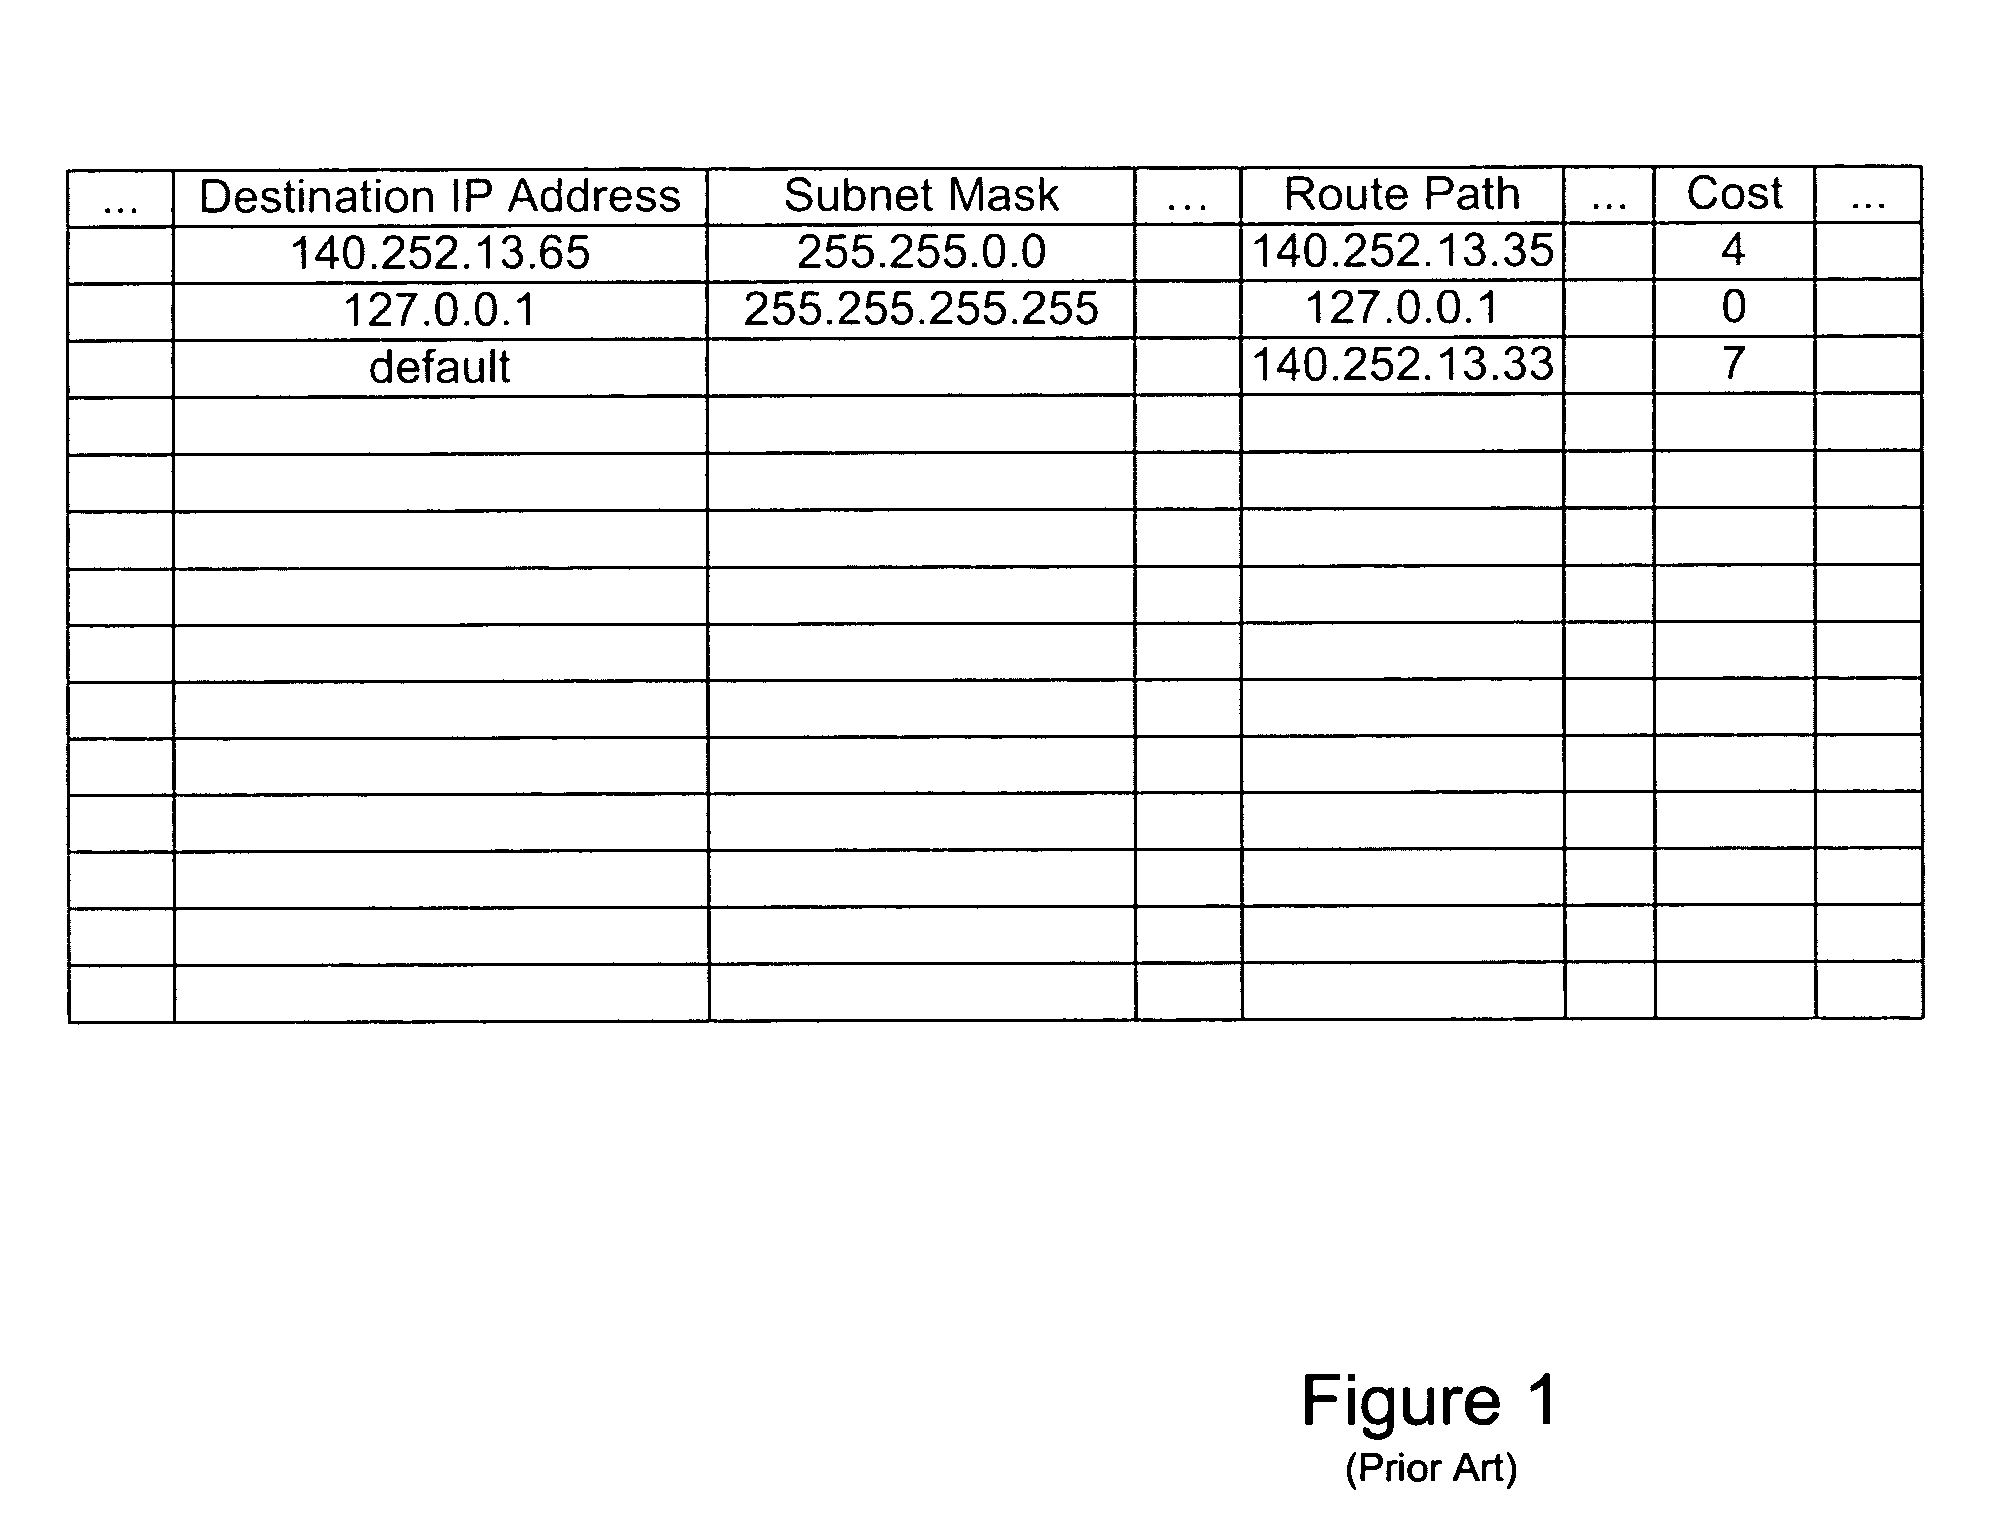 System and method for efficient sftorage and processing of IPV6 addresses